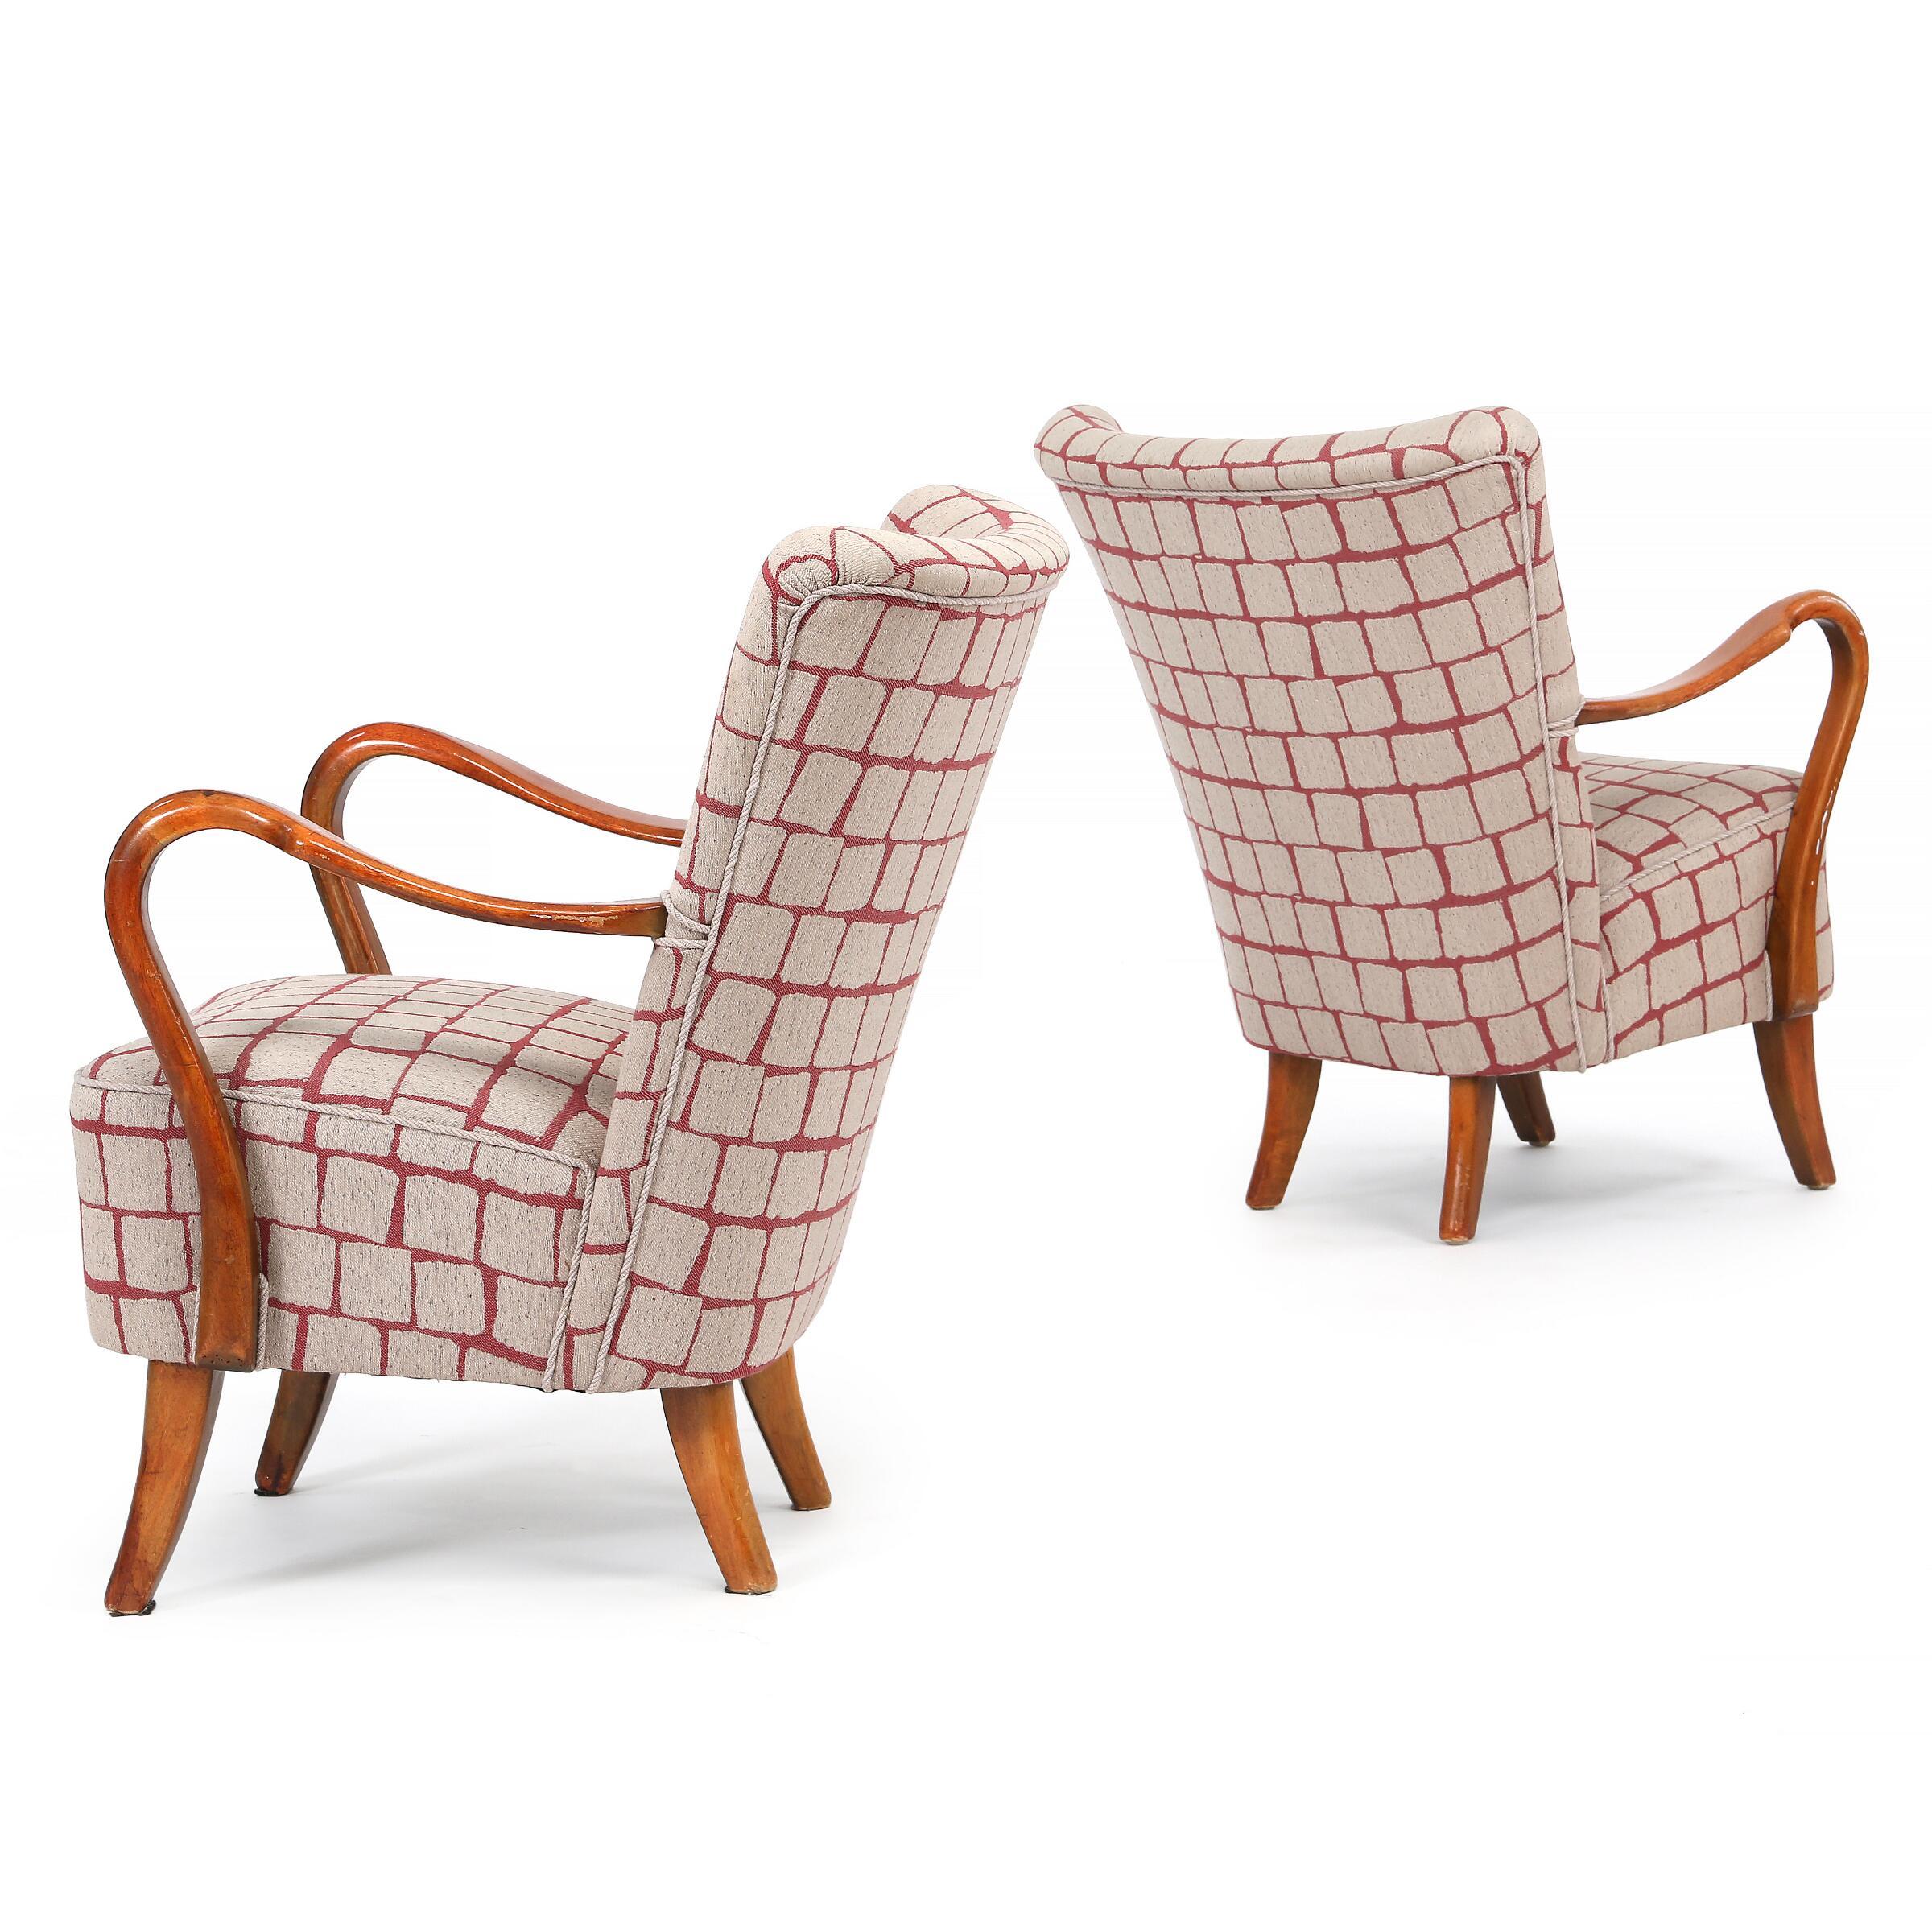 Pair of open armchairs by well-known Danish designer Alfred Christensen, in original red and off-white patterned fabric from 1950's still in good condition. The curved open arms and form create the greatest comfort, elegant klismos-style legs